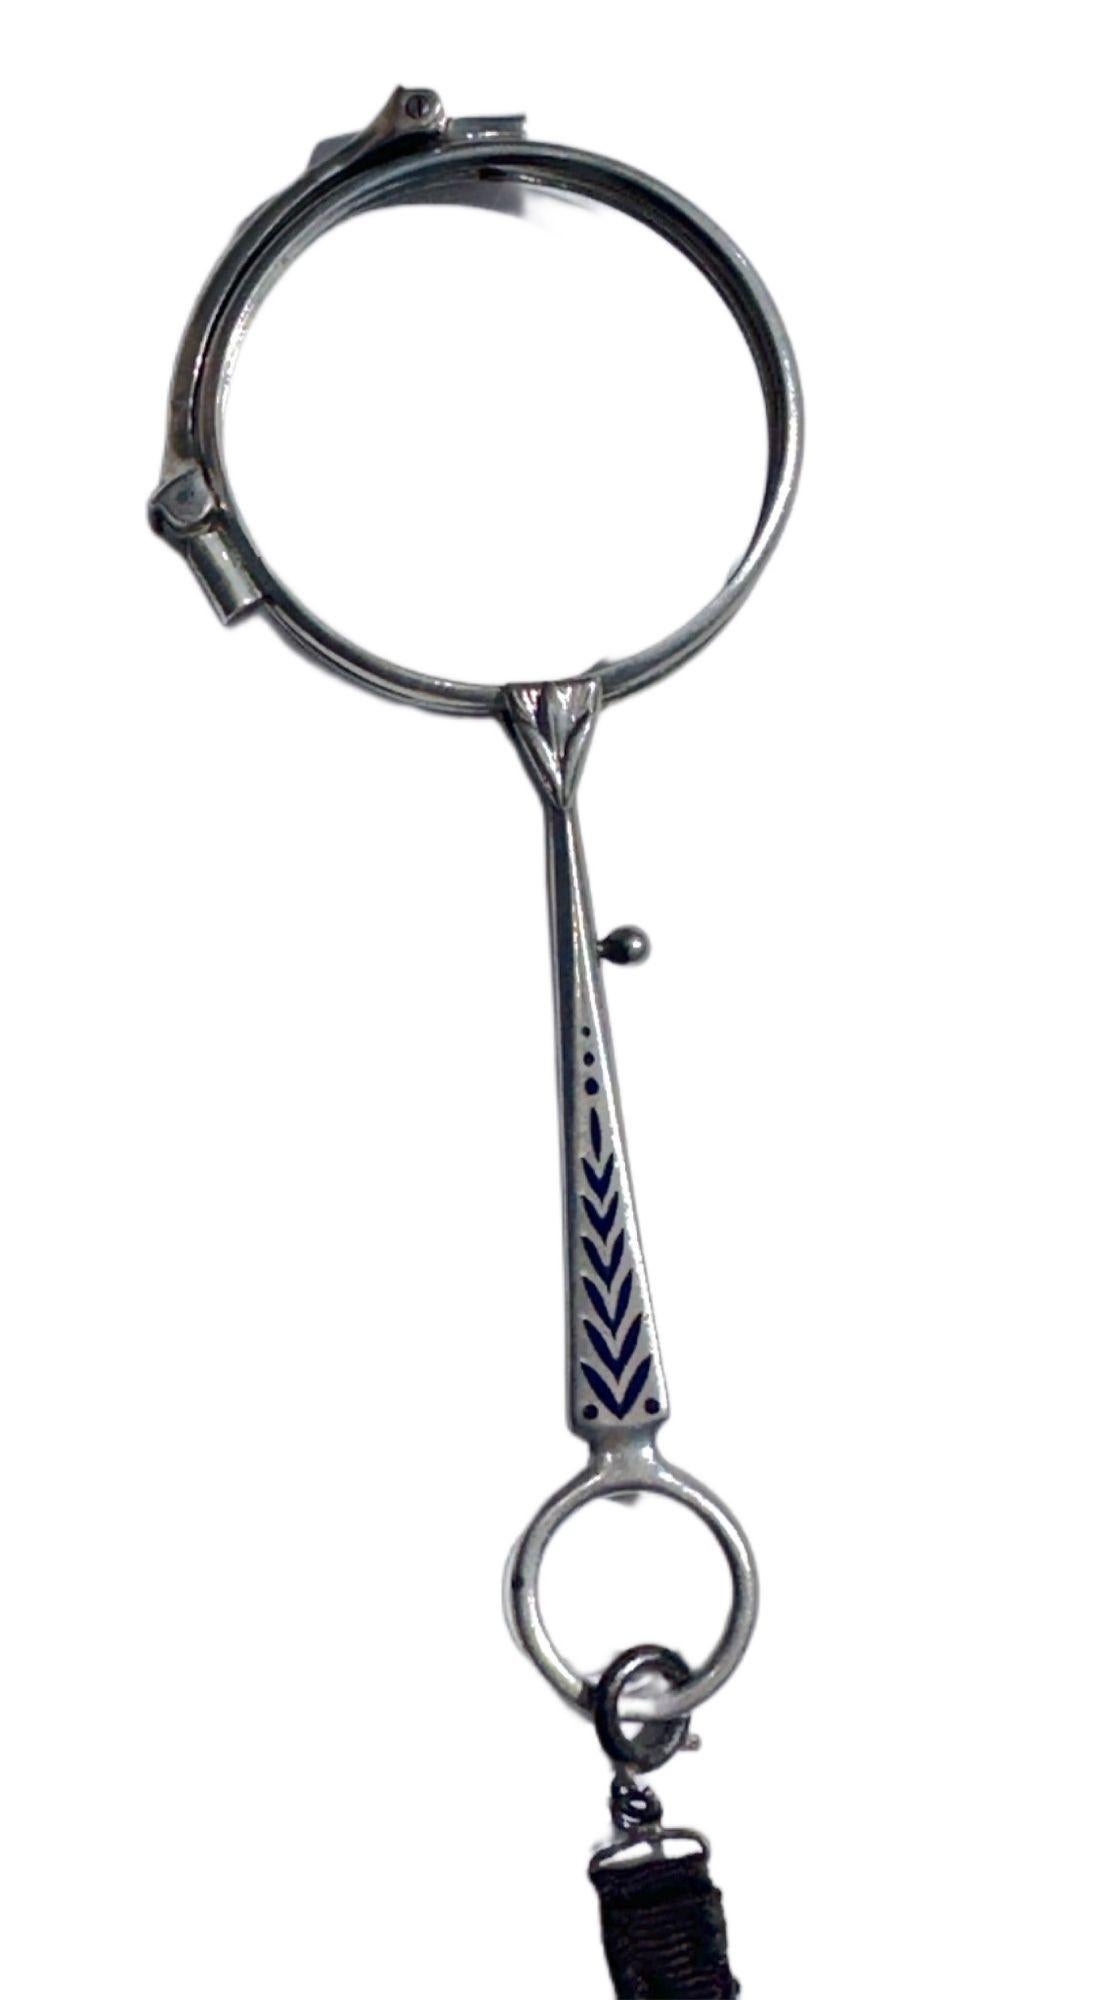 Silver Made in Germany Stamp Lorgnette with Lapis Lazuli Inlay on Handle. Has a quick-release trigger to allow quick access to bifocals. No Glass included.
A lorgnette is a stylish handheld optical accessory that gained popularity in the late 18th